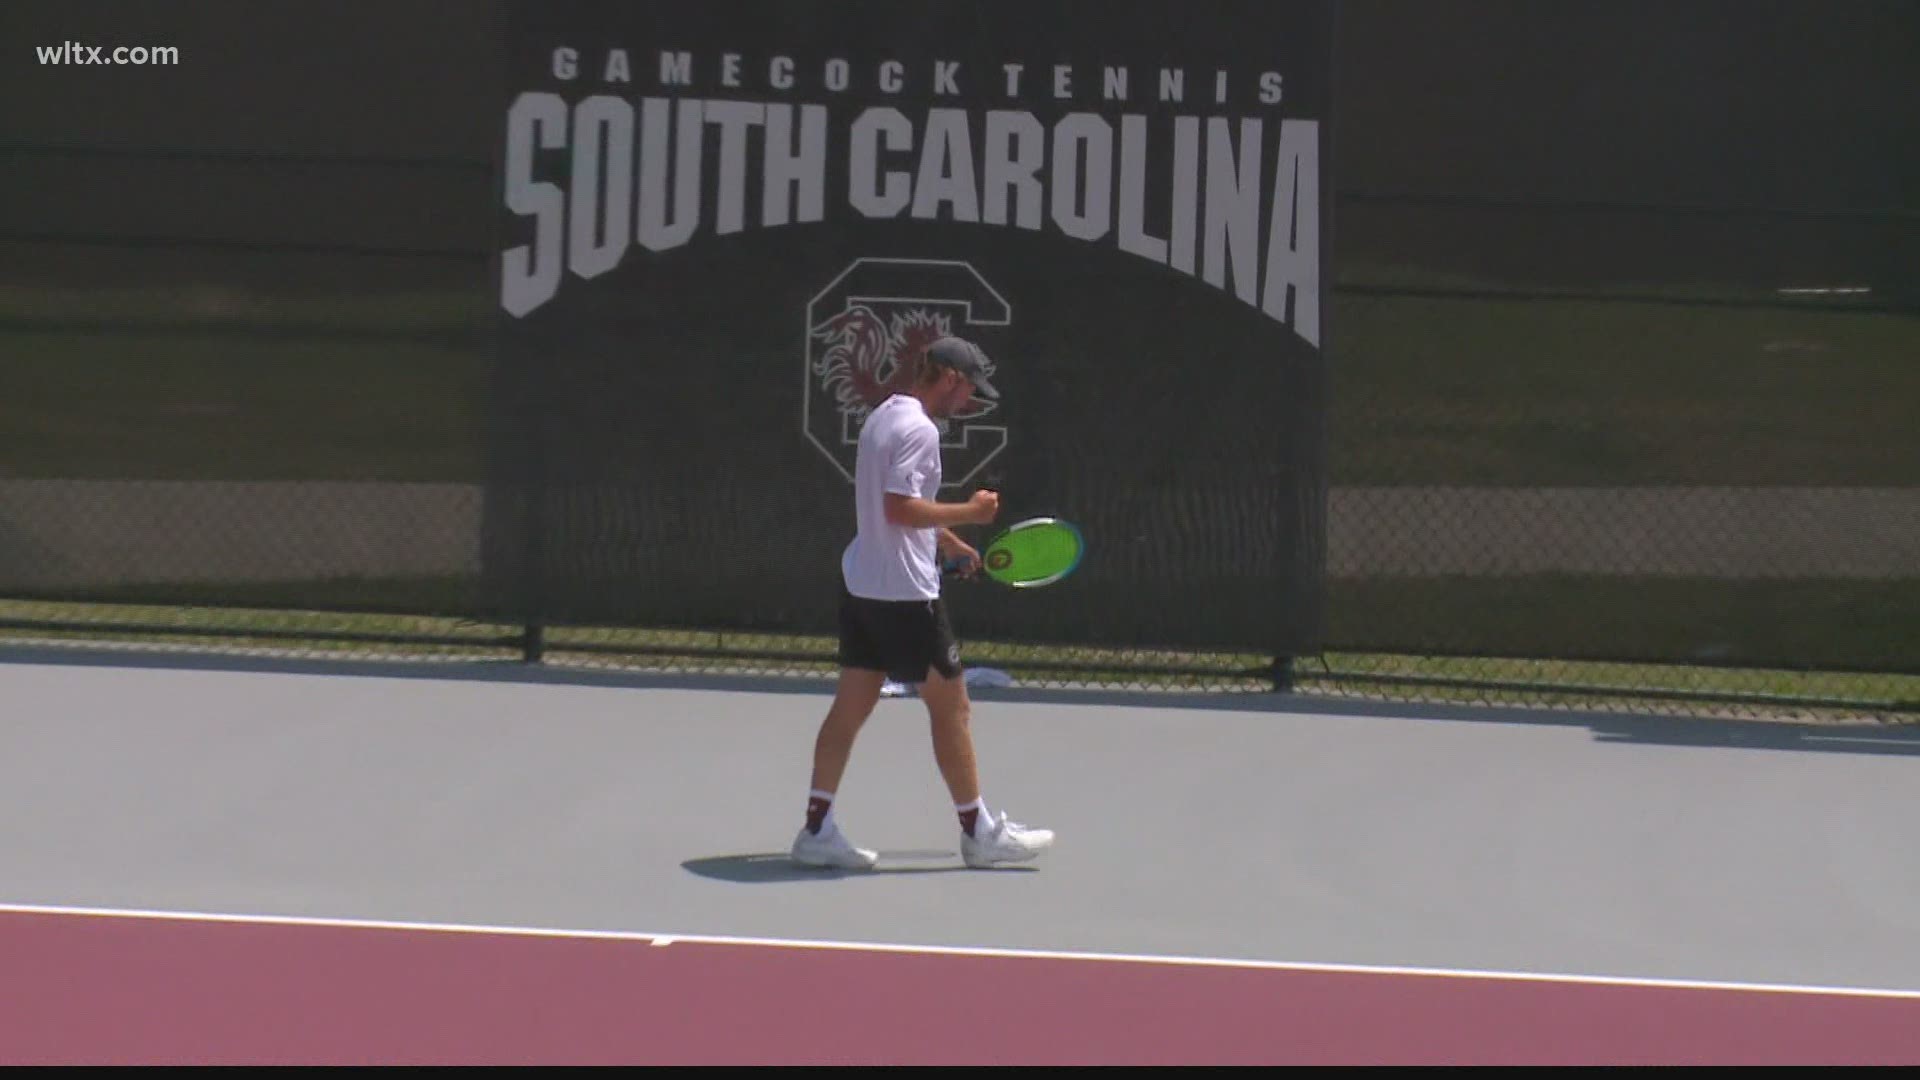 As the South Carolina men's tennis team enters Sweet 16 territory, its #6 singles player is evidence of someone who has developed into a starter.